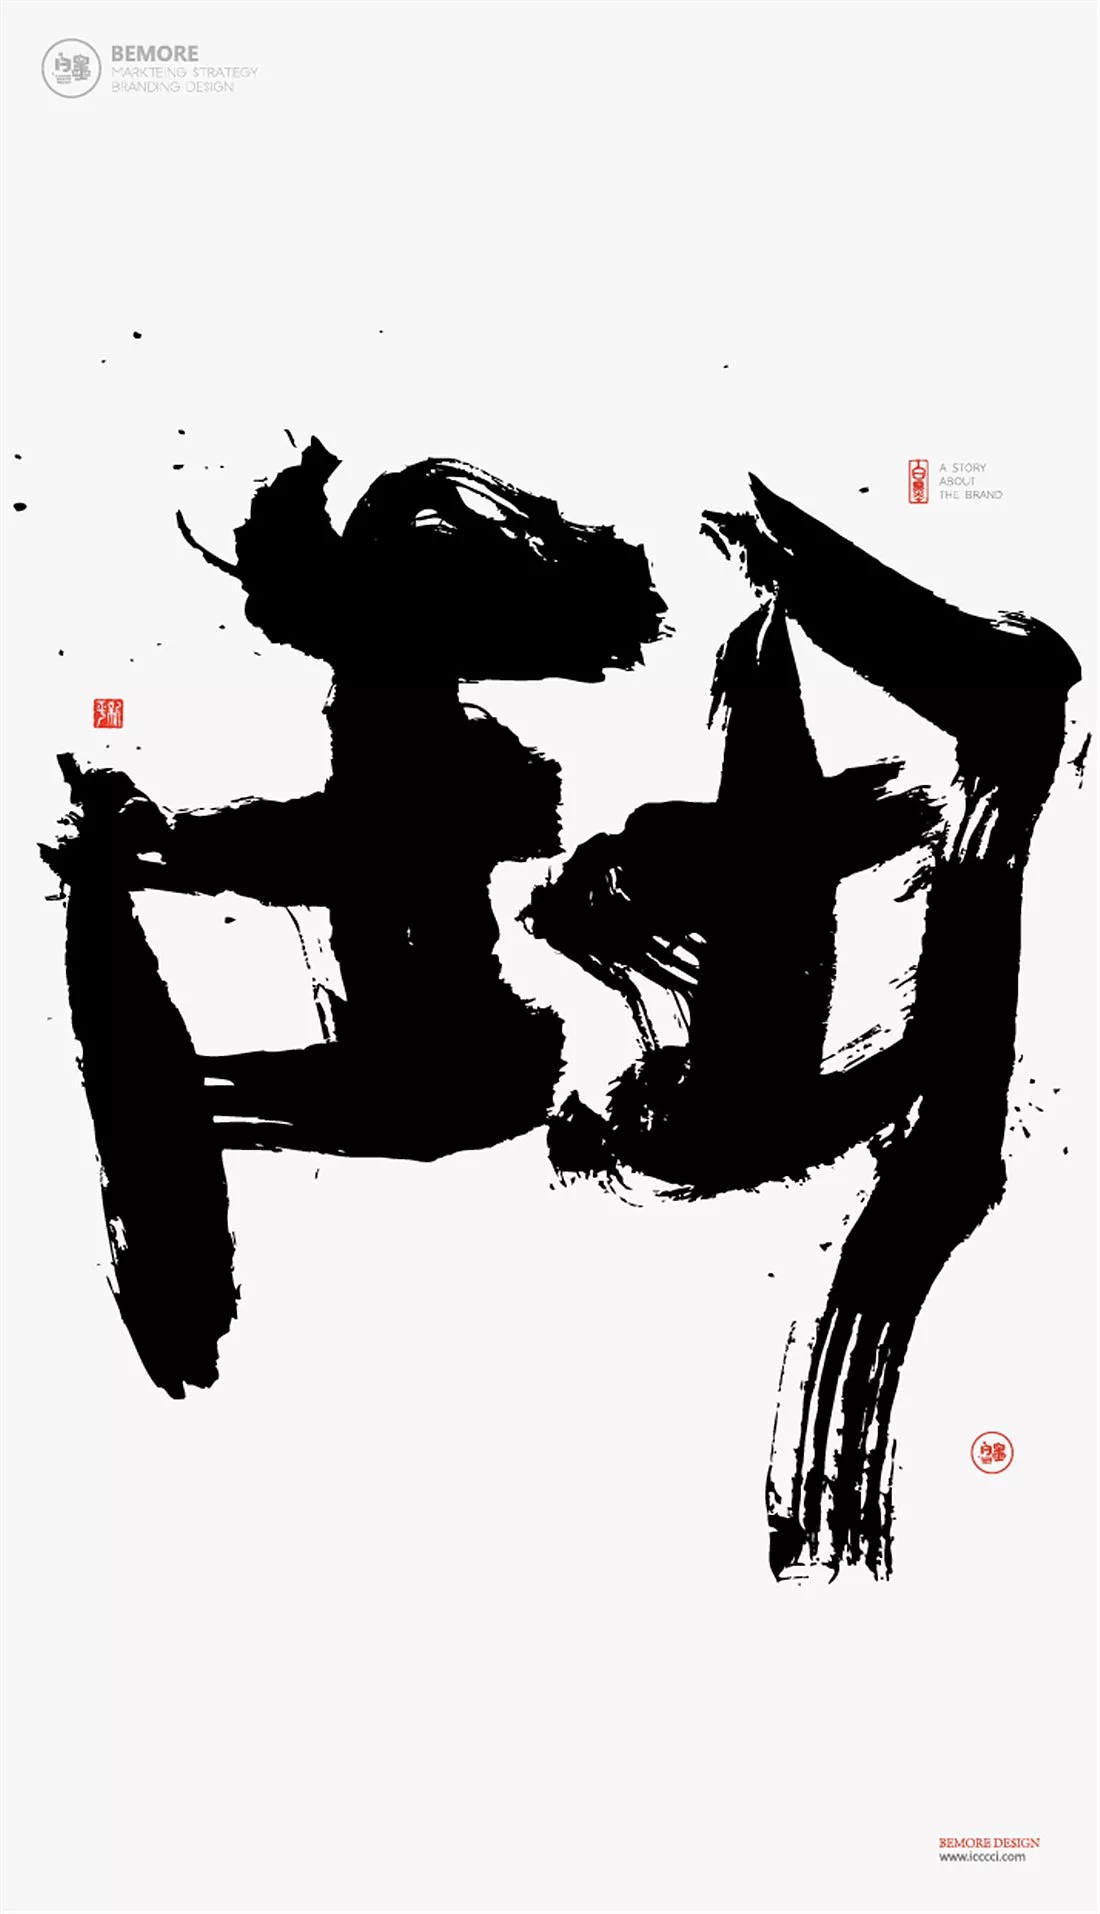 11P Calligraphy Font Design - Huangling Yehe - Greater China Festival Mid-Autumn Festival